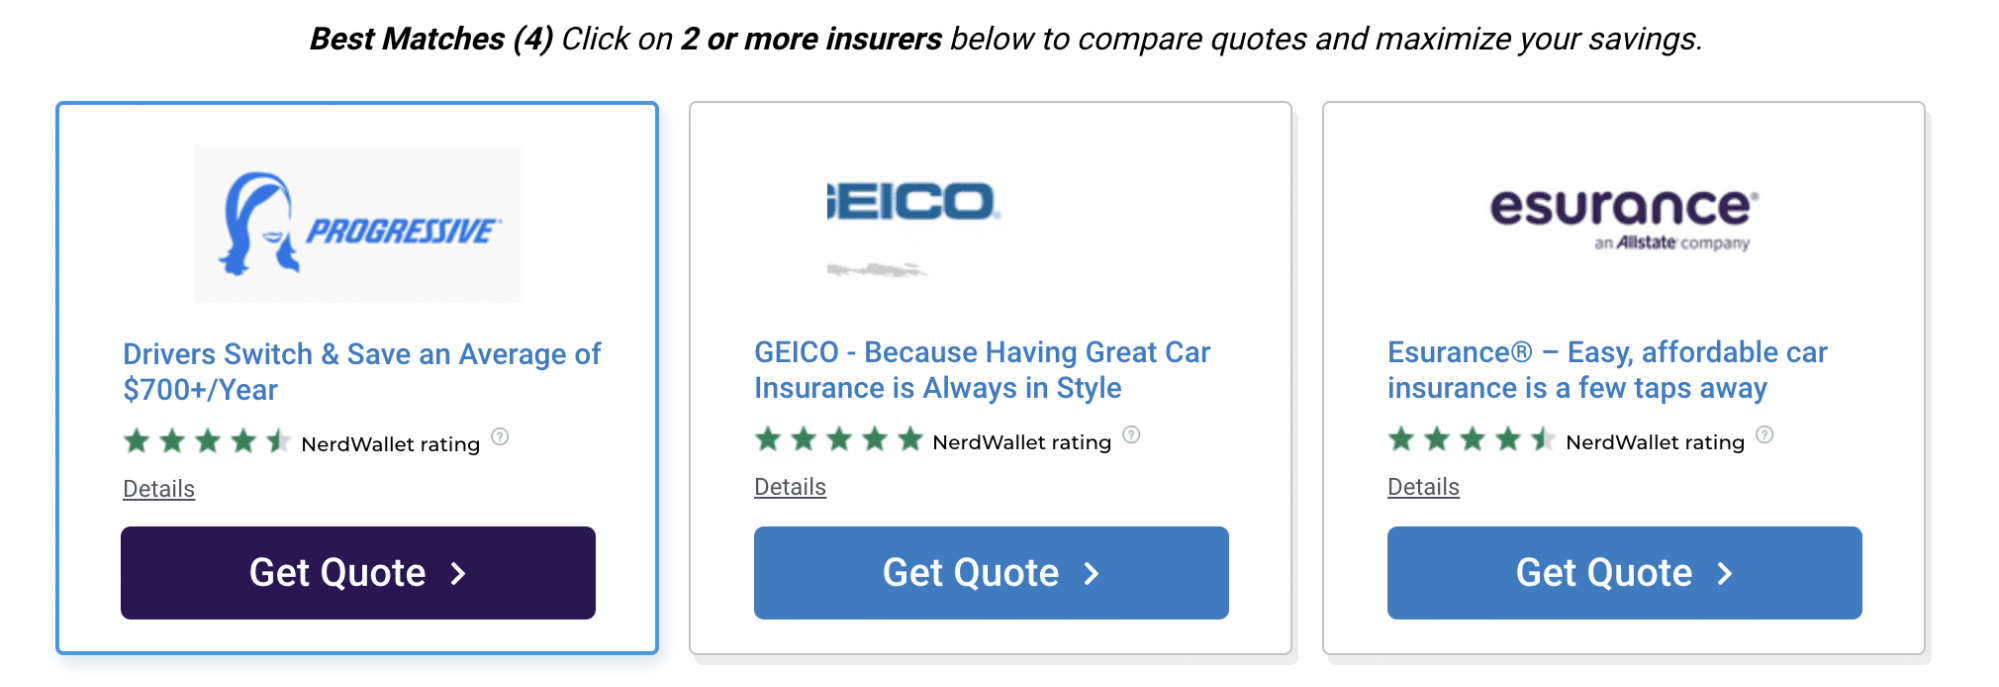 cards to click and get quotes from progressive, geico, esurance